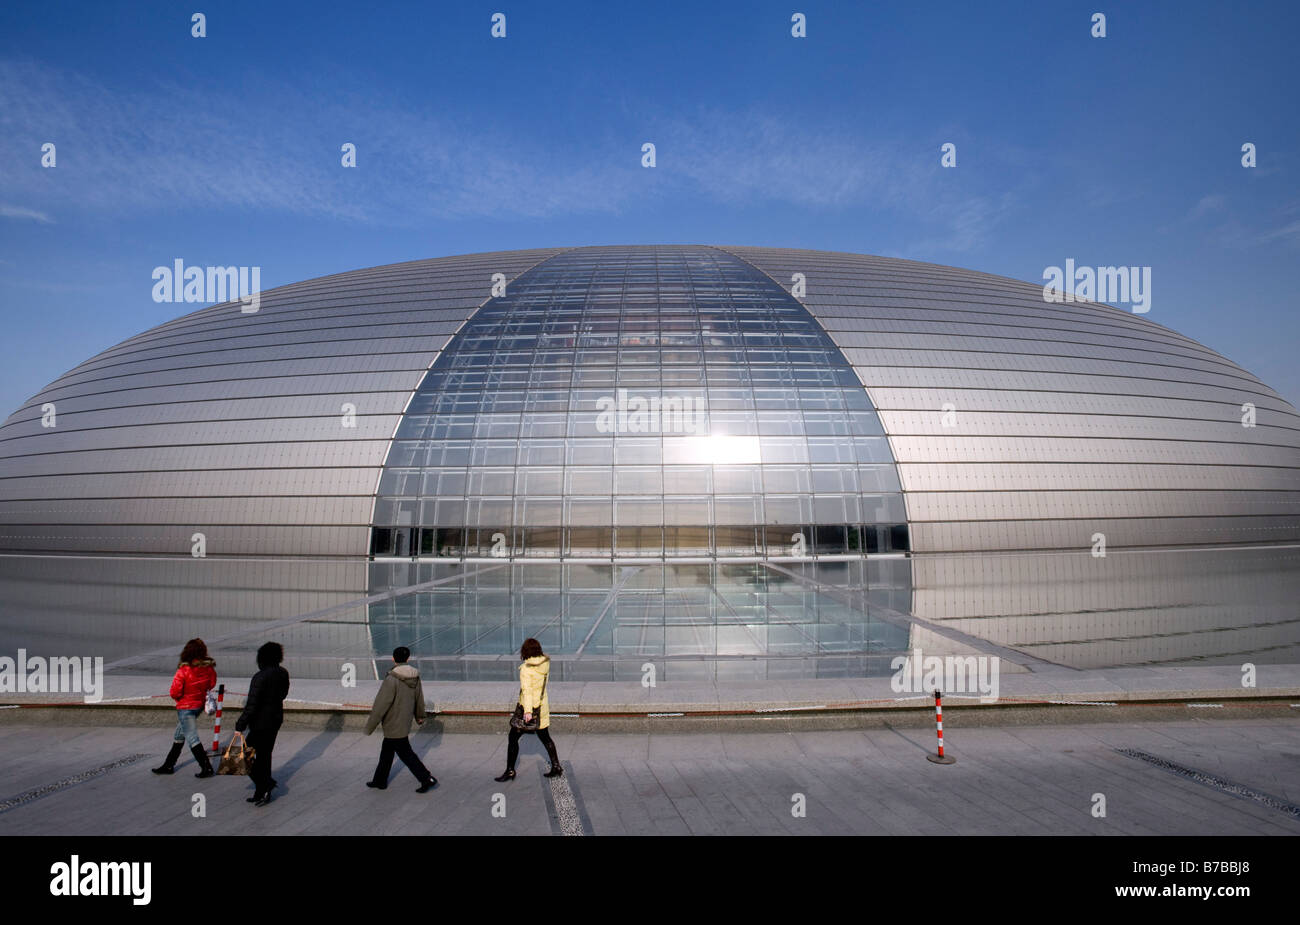 New National Grand Theatre or 'The Egg' designed by Paul Andreu in Beijing 2009 Stock Photo